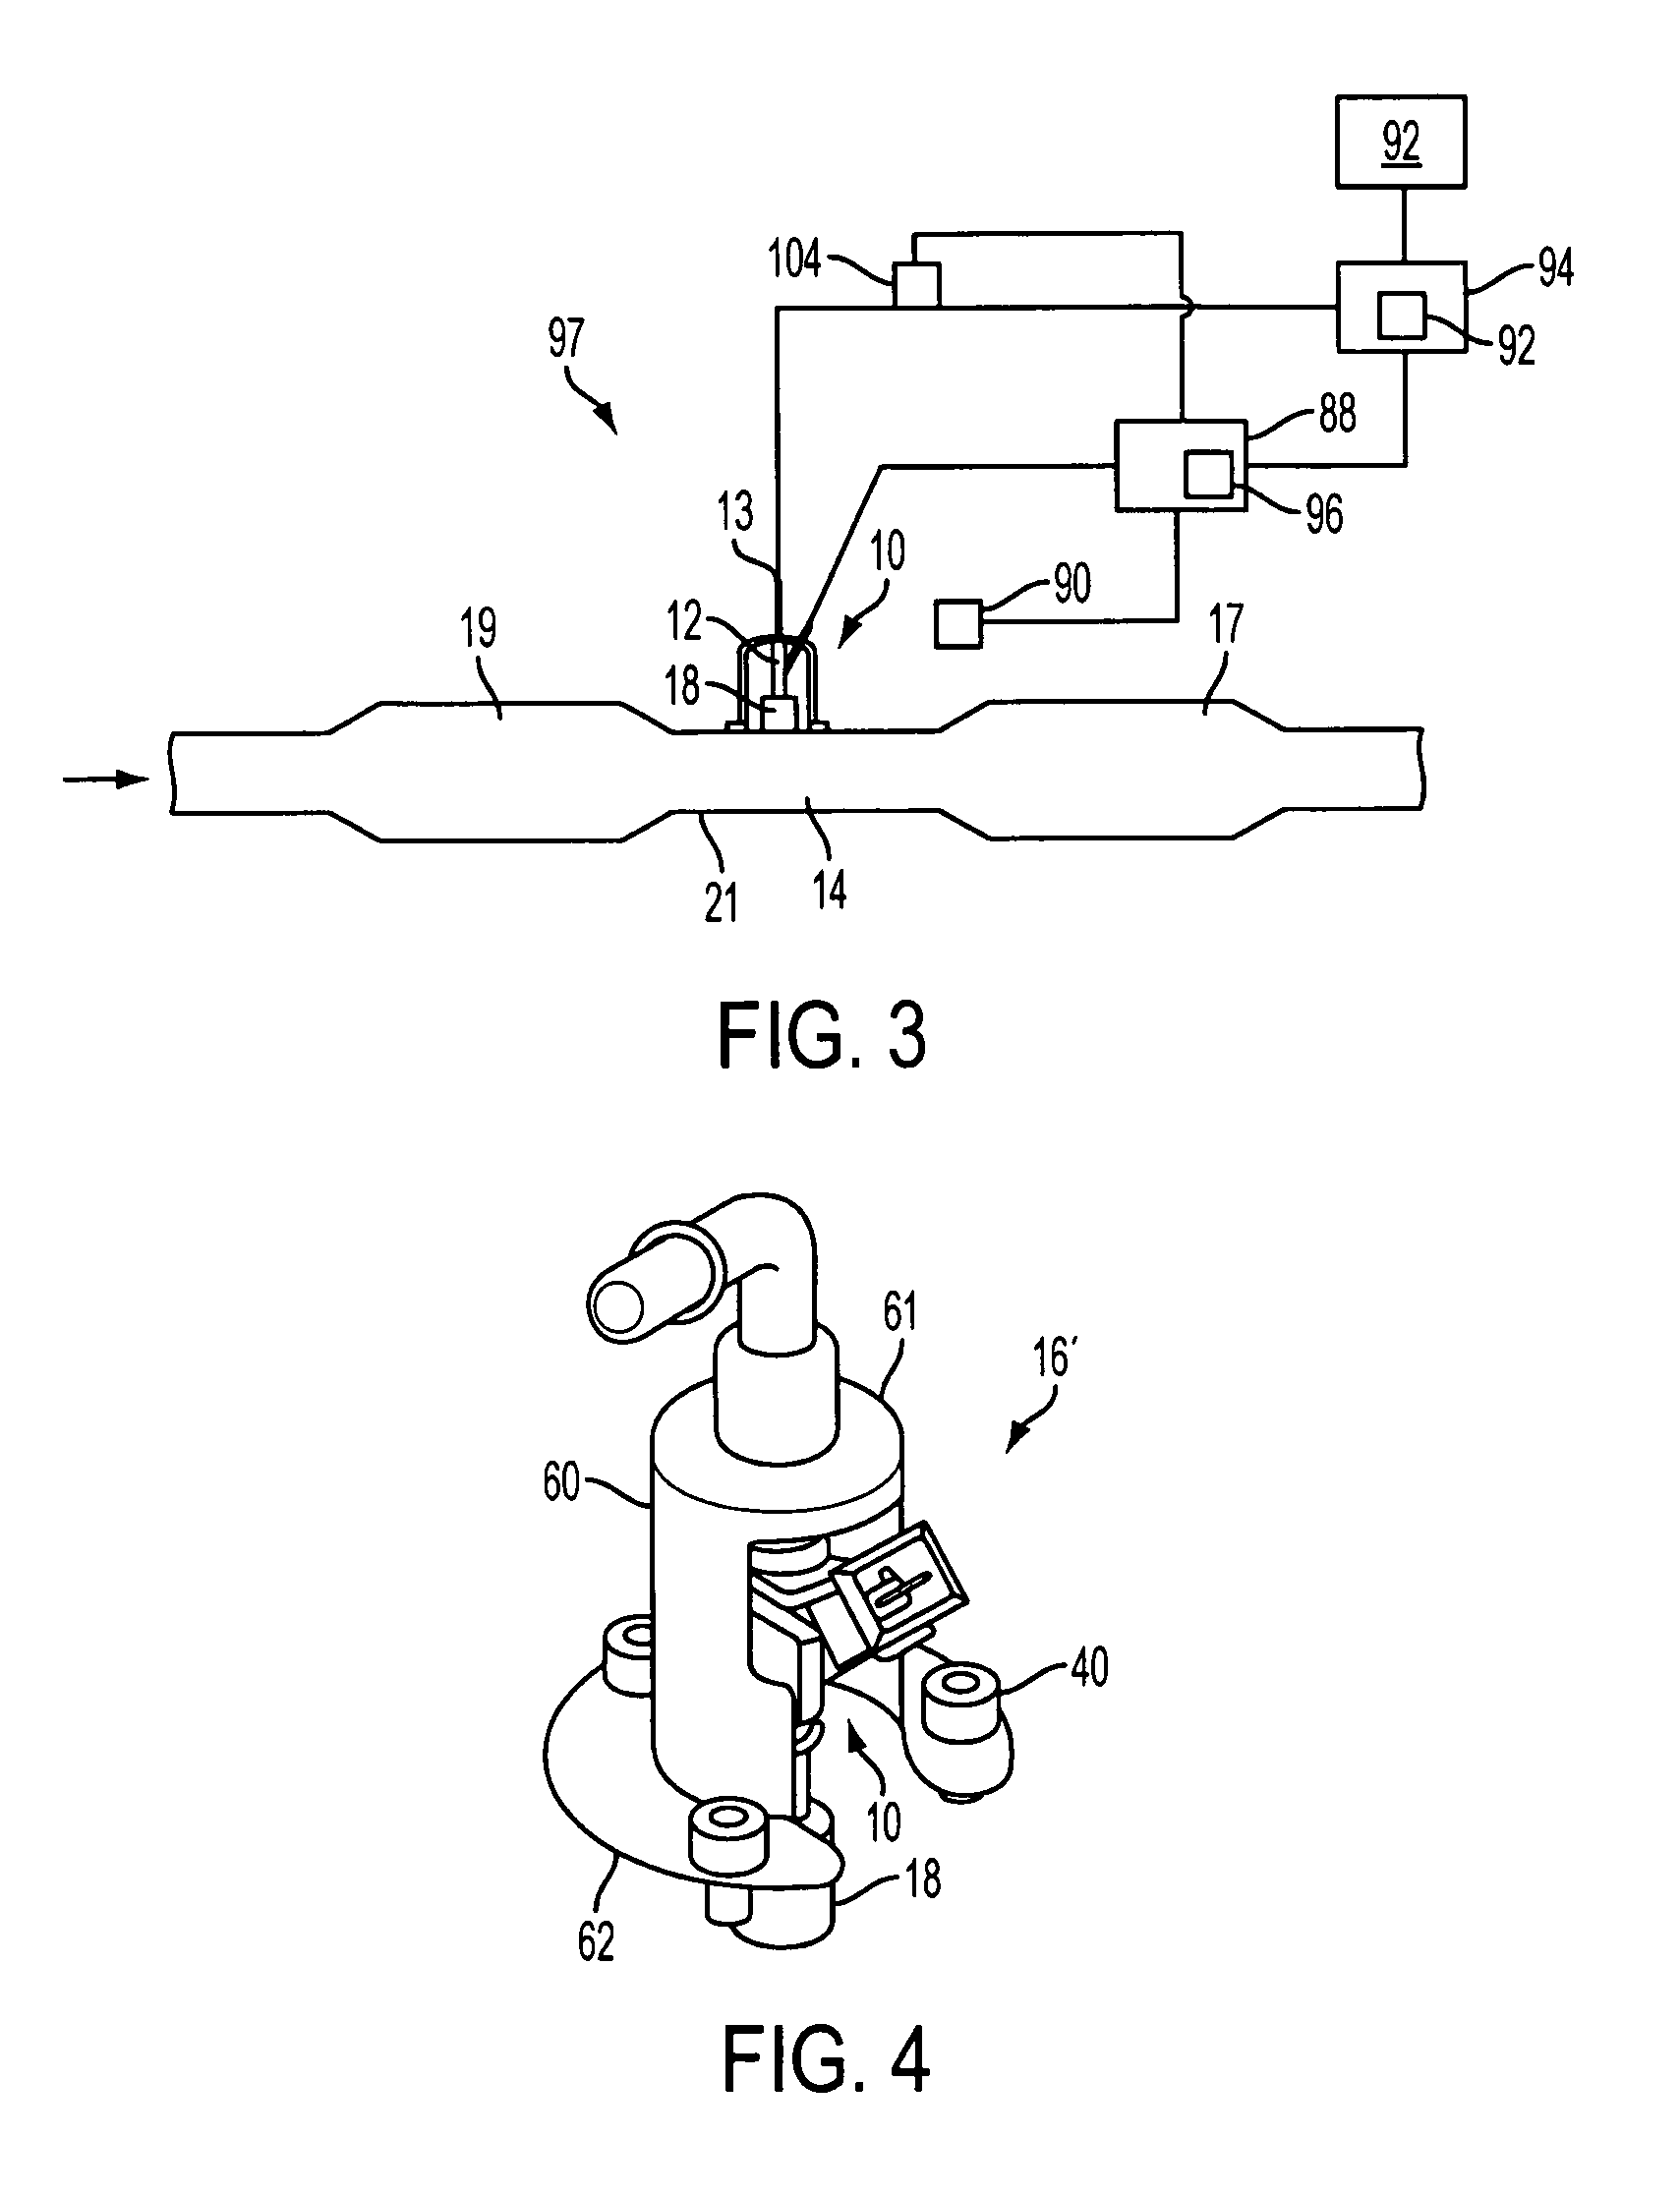 Reductant delivery unit for selective catalytic reduction